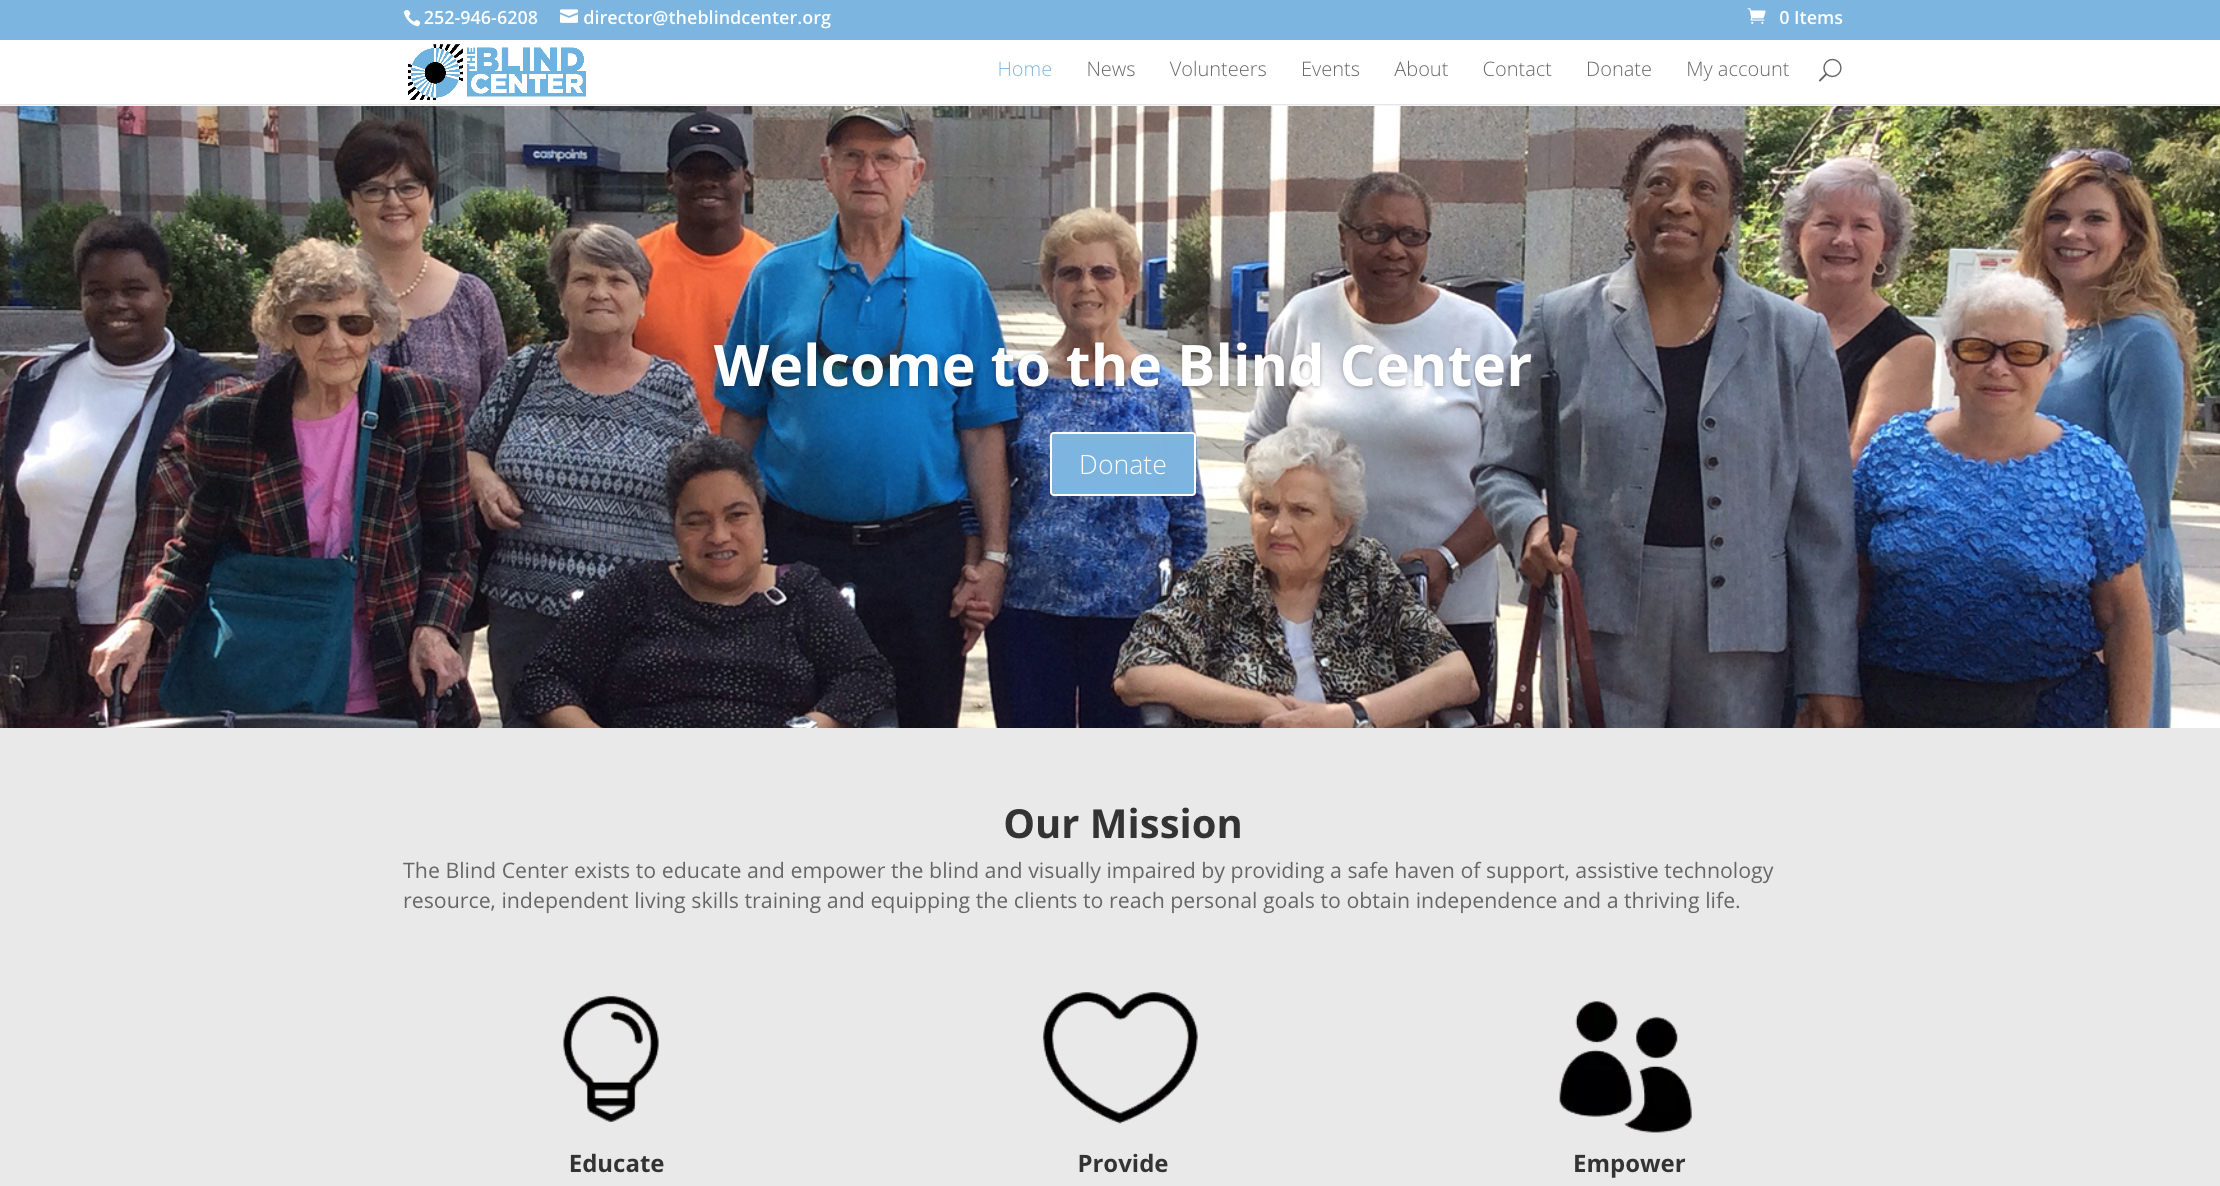 A screenshot of the new Blind Center website, published to "Web Design, WordPress, and Graphic Design for the Blind Center"